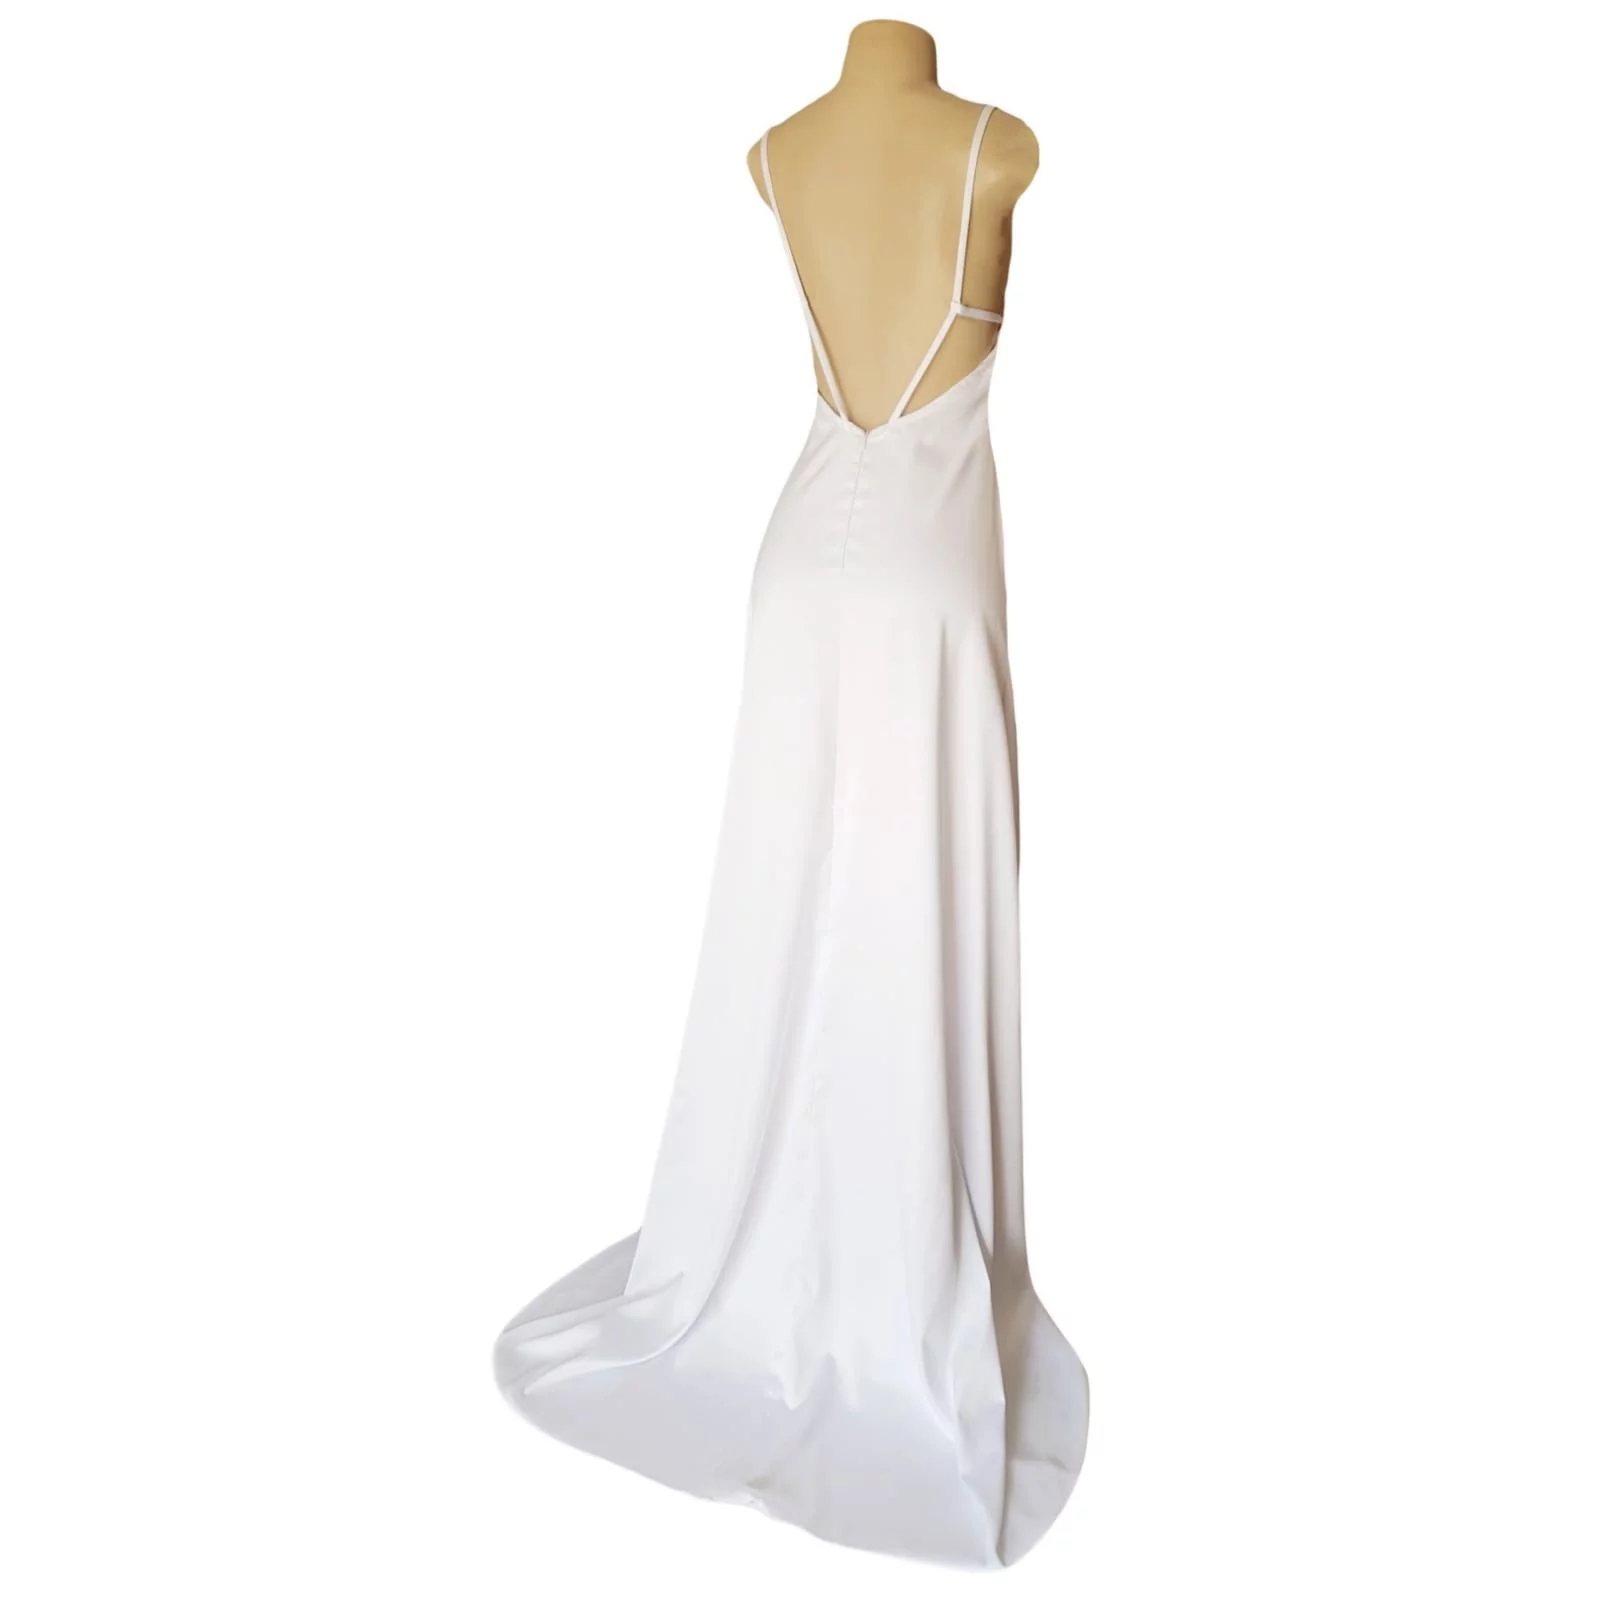 White satin long prom dress with a low open back 6 white satin long prom dress with a low open back, with strap detail. Straight neckline, 2 slits and a train.